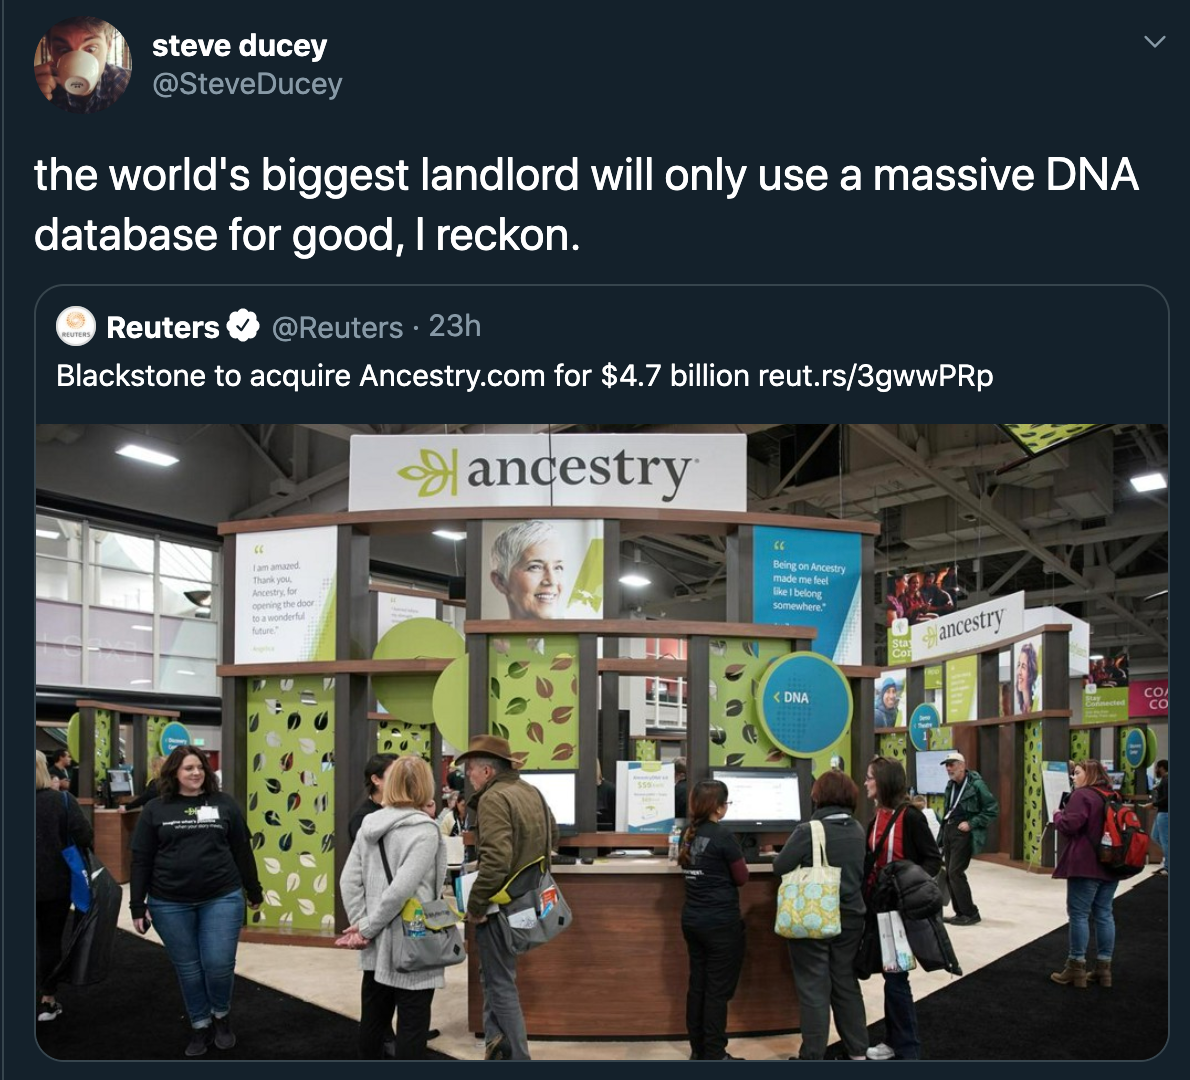 the world's biggest landlord will only use a massive Dna database for good, I reckon. - Blackstone to acquire Ancestry.com for $4.7 billion